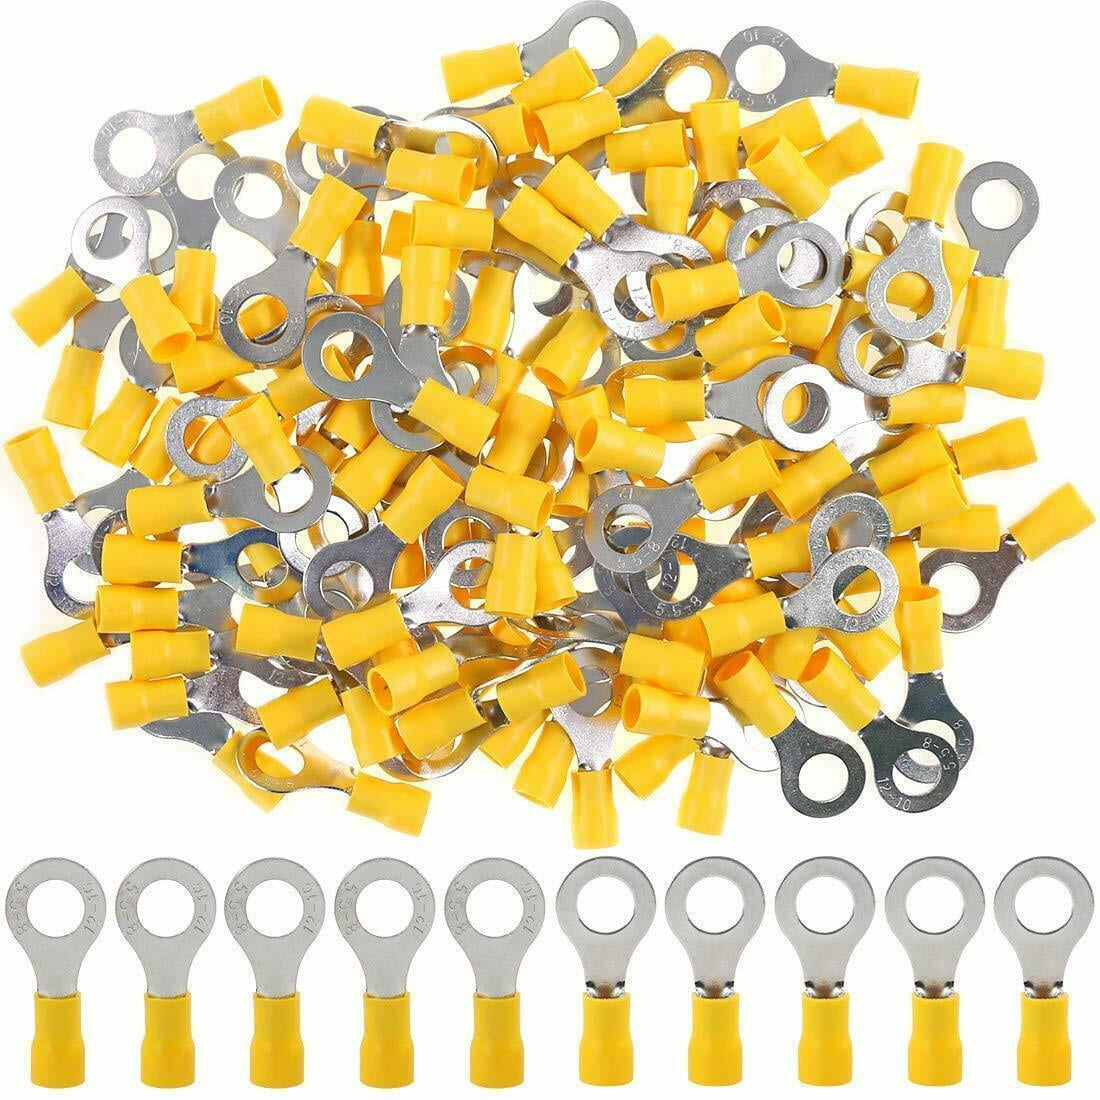 100pcs Yellow Insulated Crimp Ring Terminals Connectors Various Stud Size 